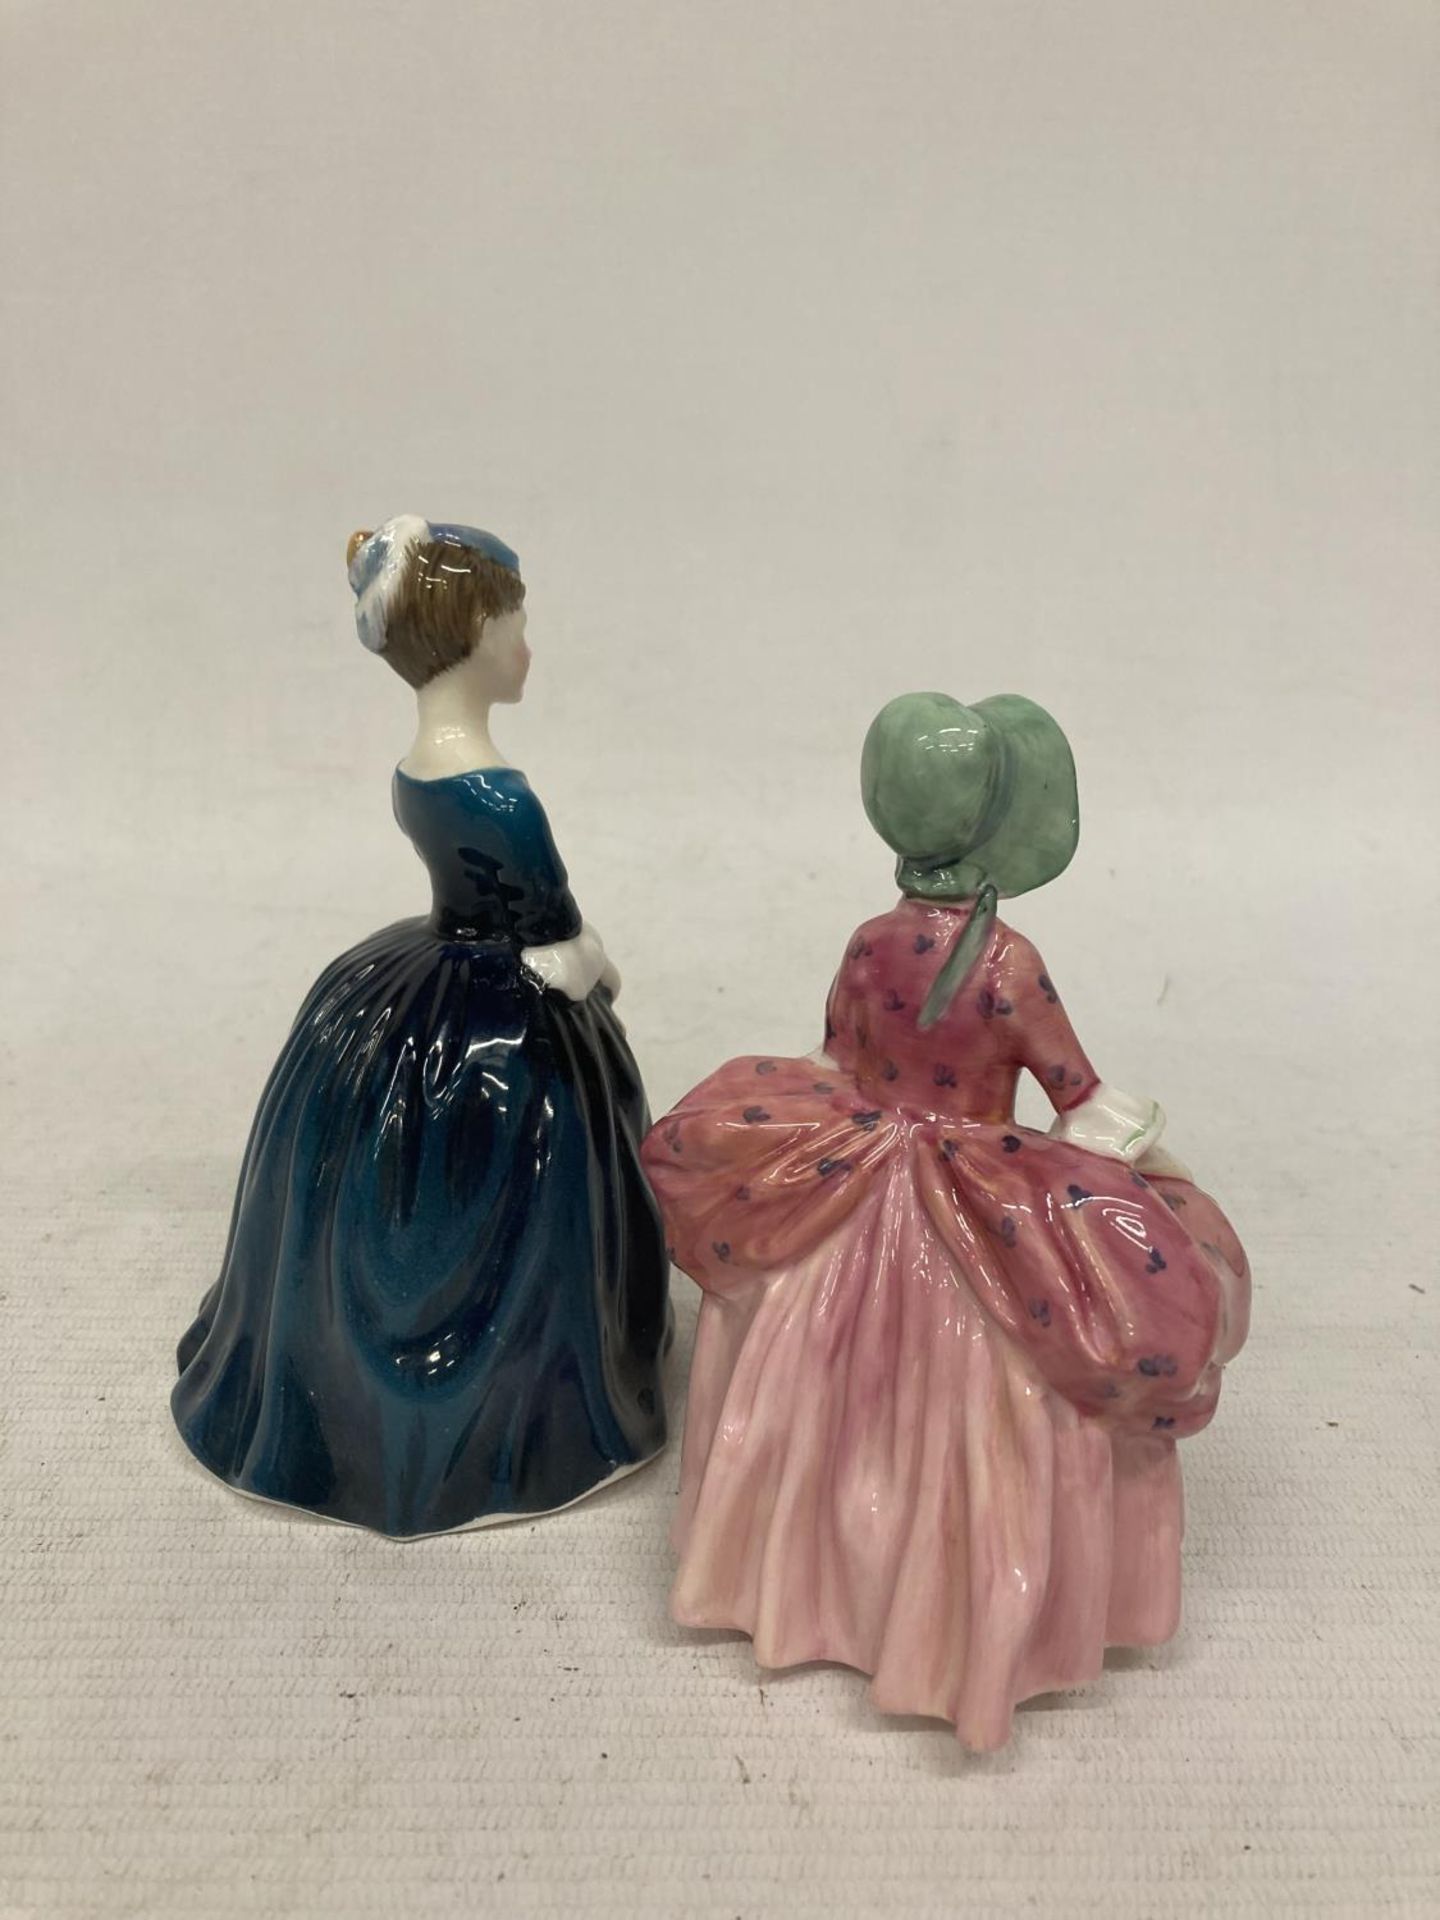 TWO SMALL ROYAL DOULTON FIGURES "BO-PEEP" AND "CHERIE" - Image 2 of 3